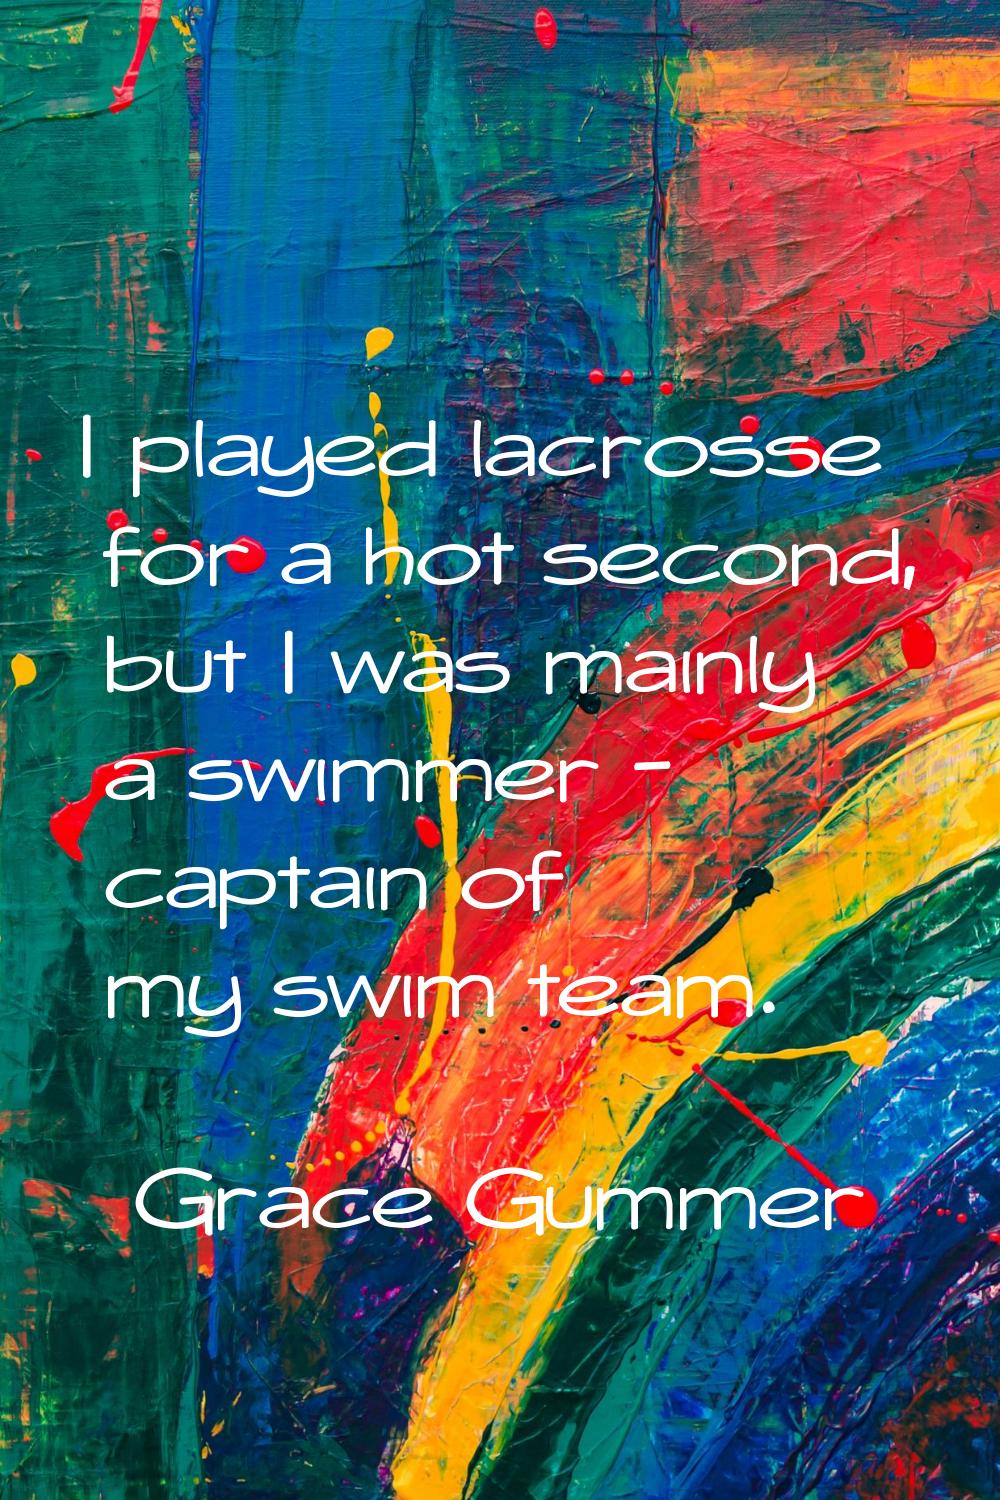 I played lacrosse for a hot second, but I was mainly a swimmer - captain of my swim team.